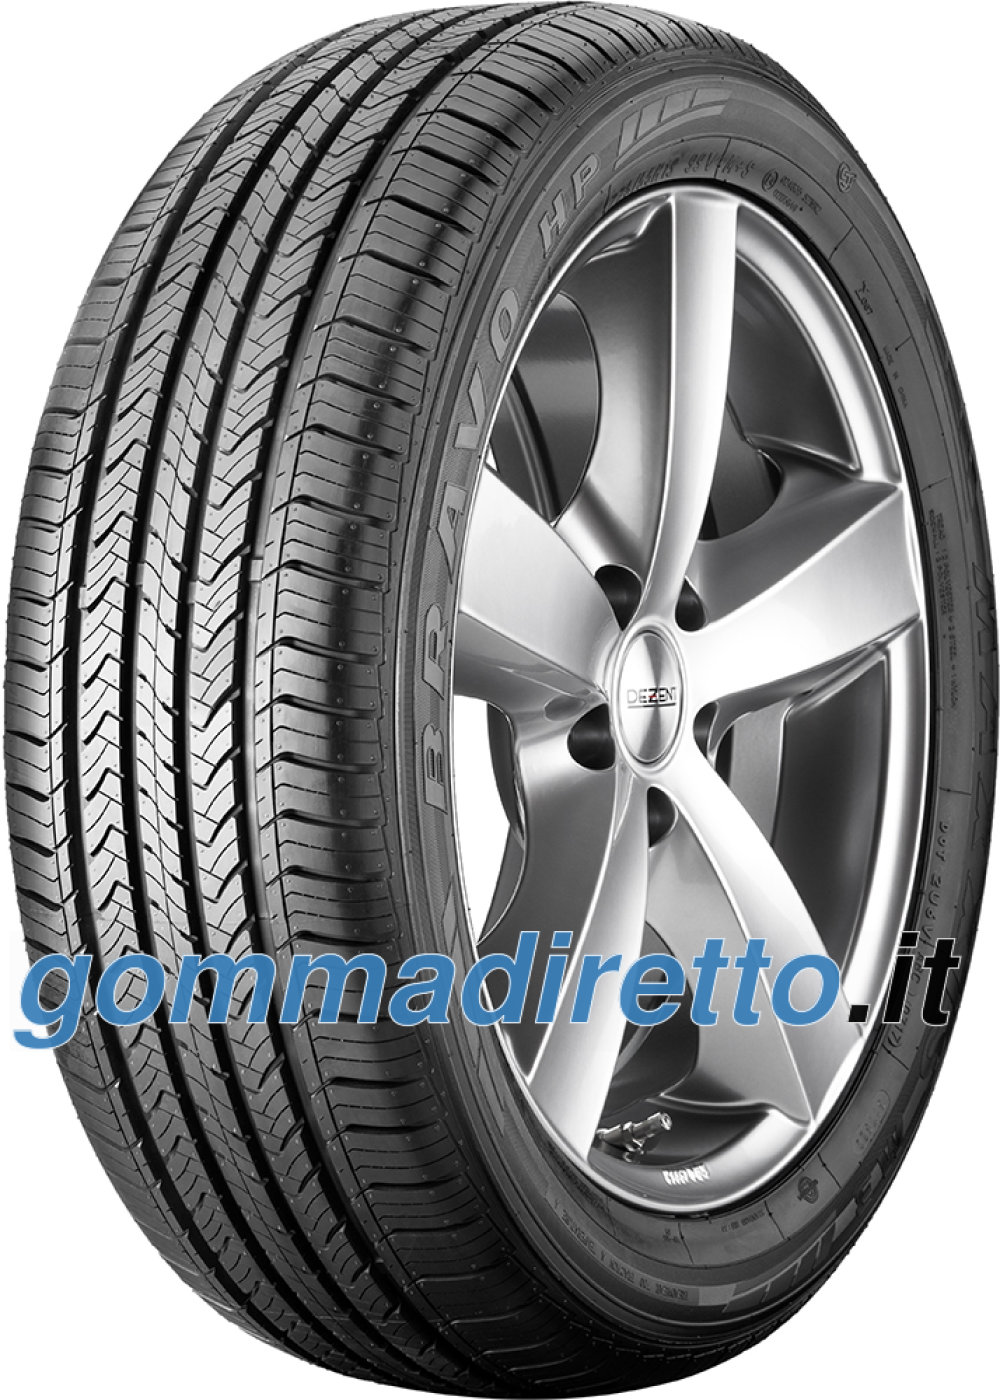 Image of Maxxis HP-M3 ( 265/50 R19 110V XL )